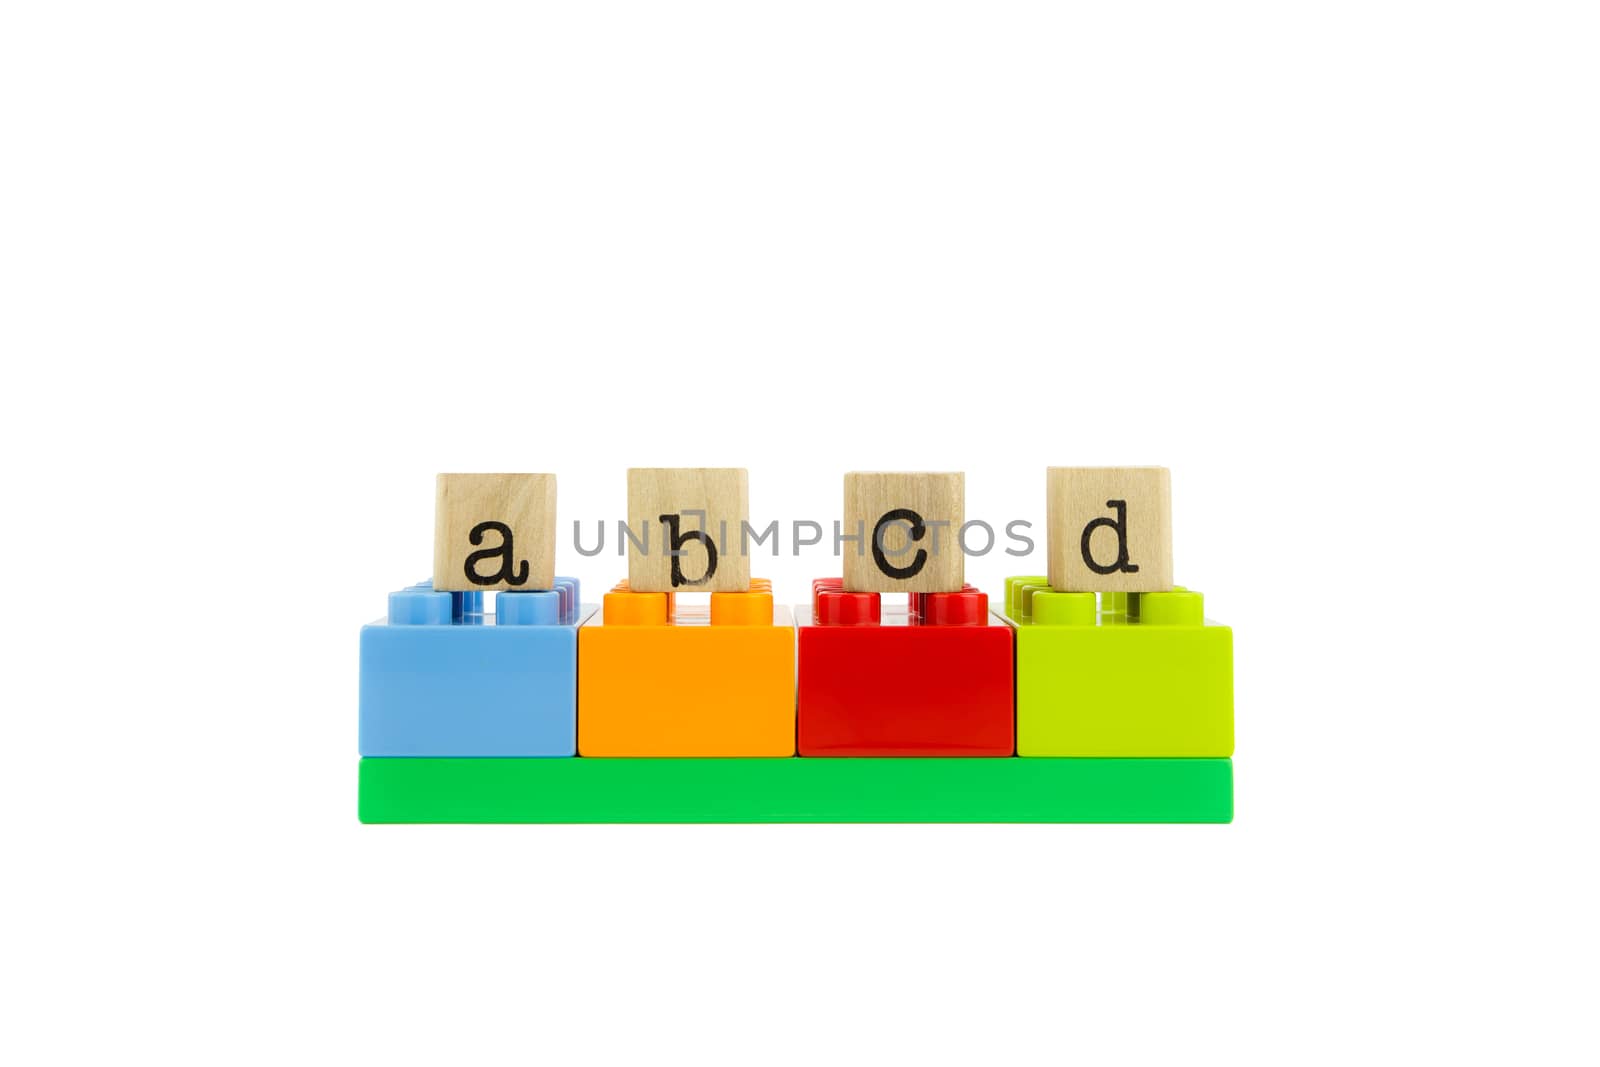 abcd word on wood stamps and colorful toy blocks by vinnstock